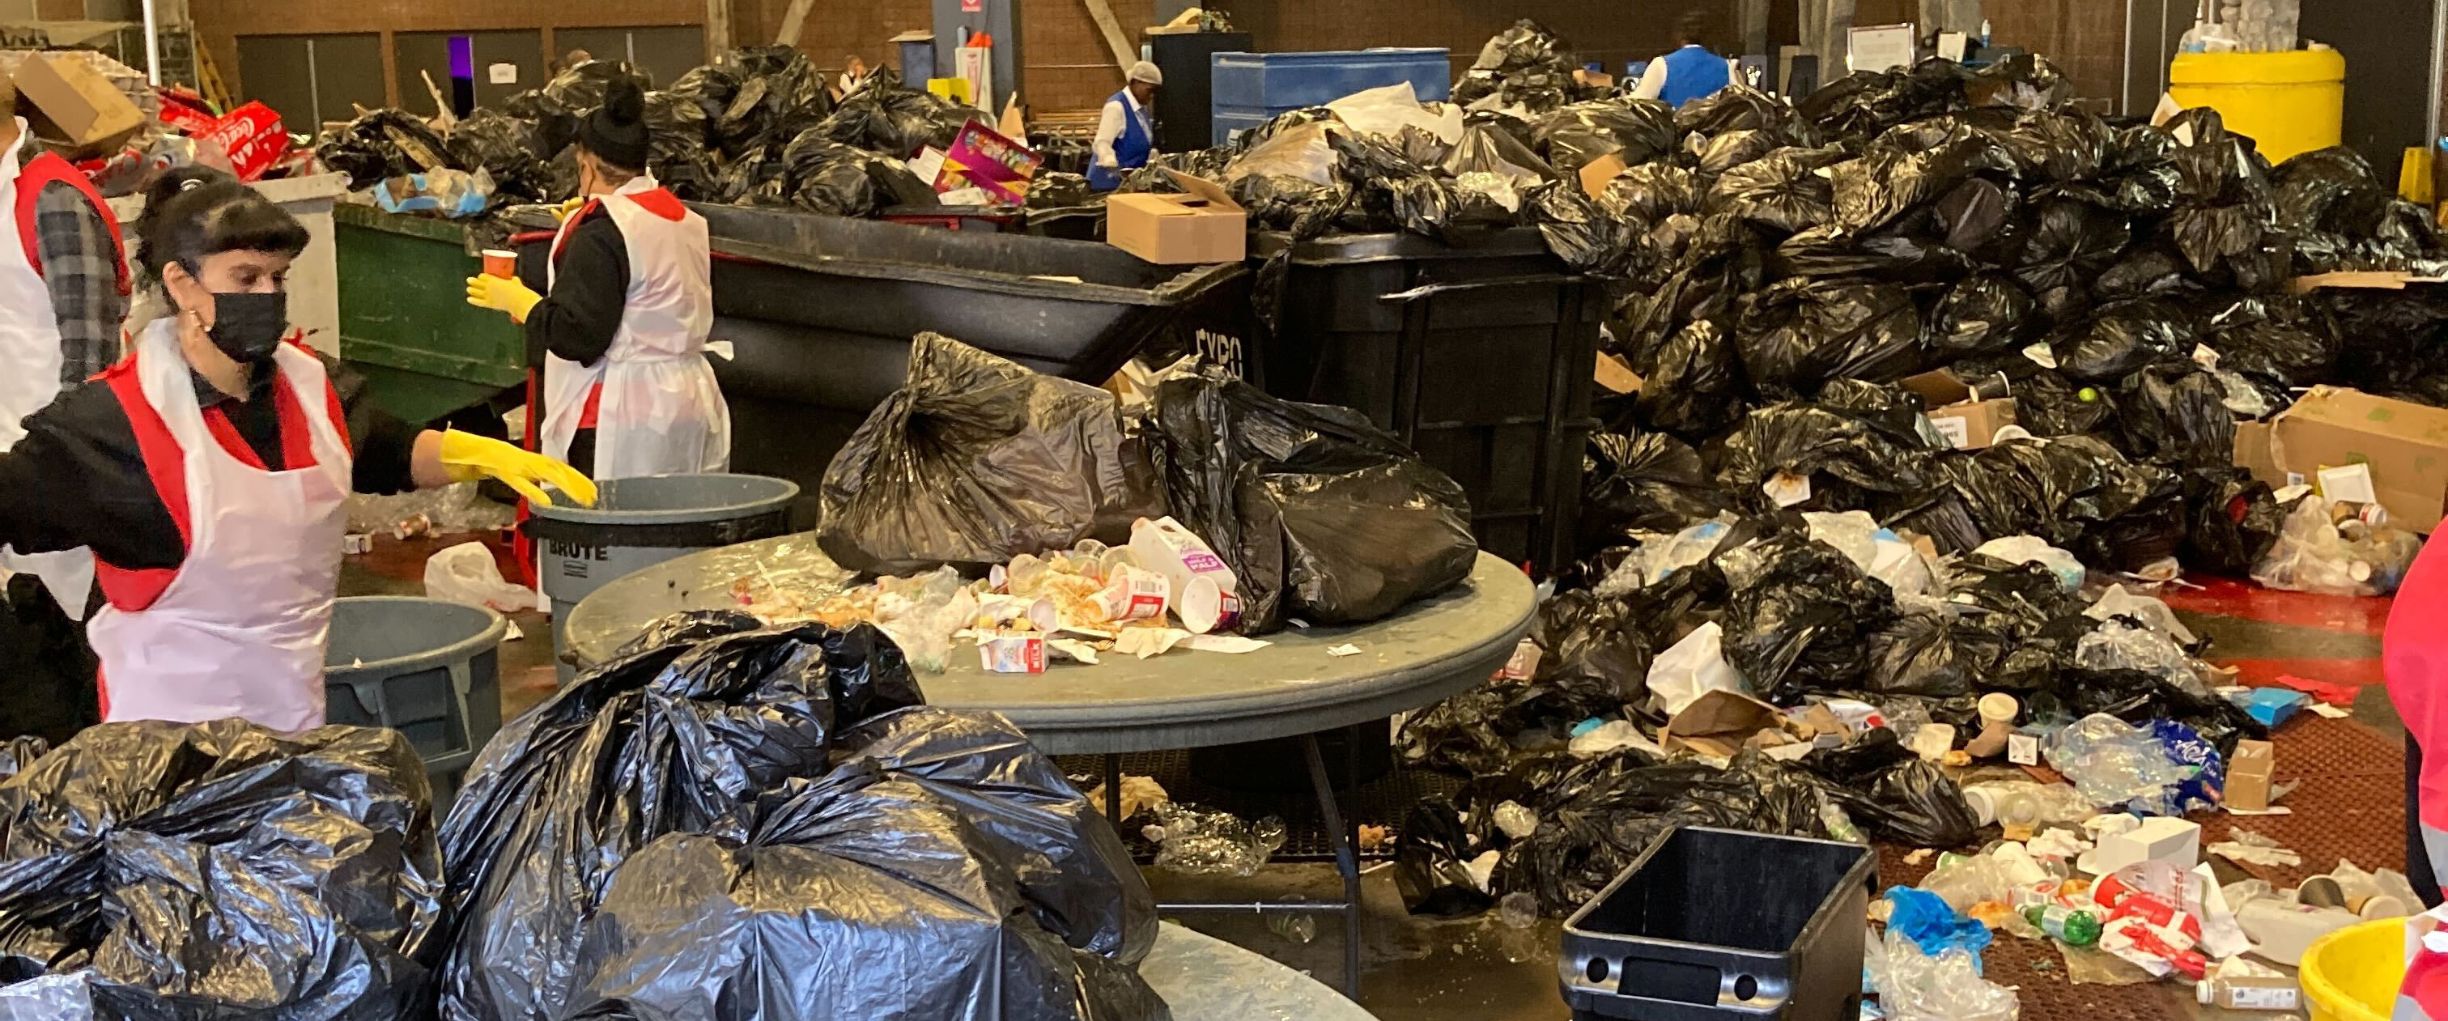 A room full of trash, recycles, and compost workers in aprons sorting